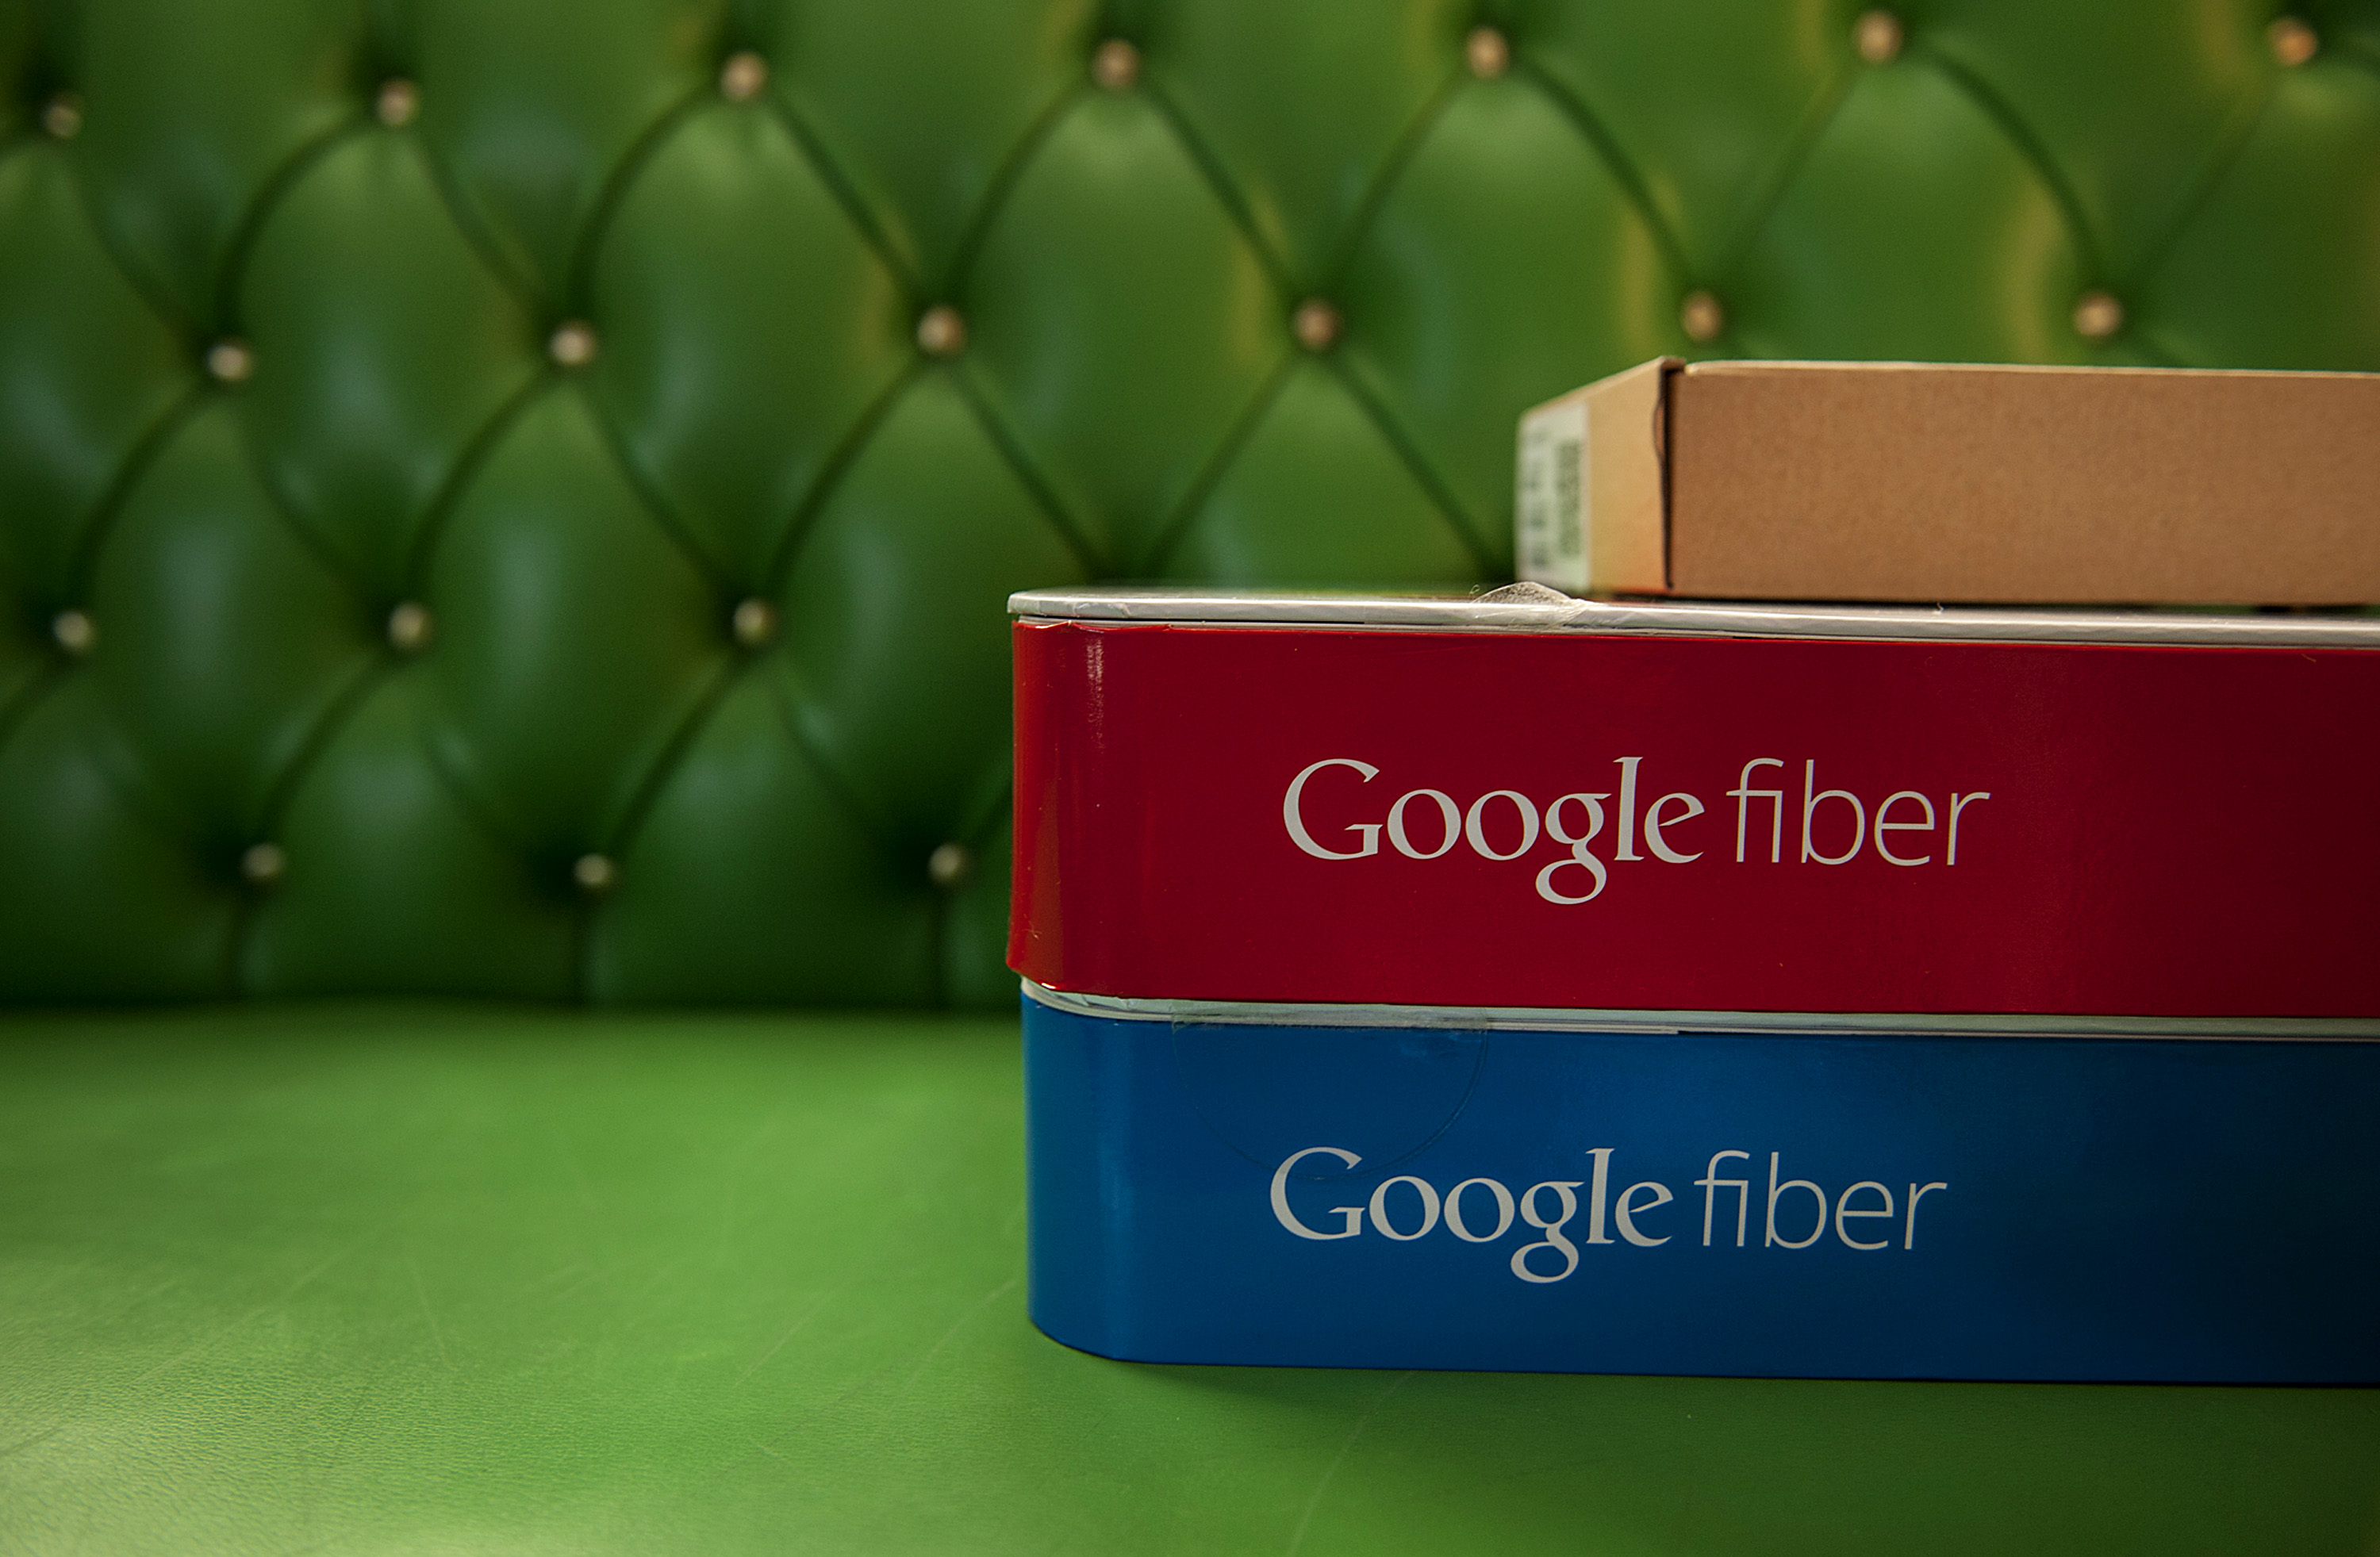 Boxes of equipment needed to install Google Fiber broadband network sit on a couch at the home of customer Becki Sherwood in Kansas City, Kansas, U.S., on Tuesday, Nov. 27, 2012. (Bloomberg&mdash;Bloomberg via Getty Images)